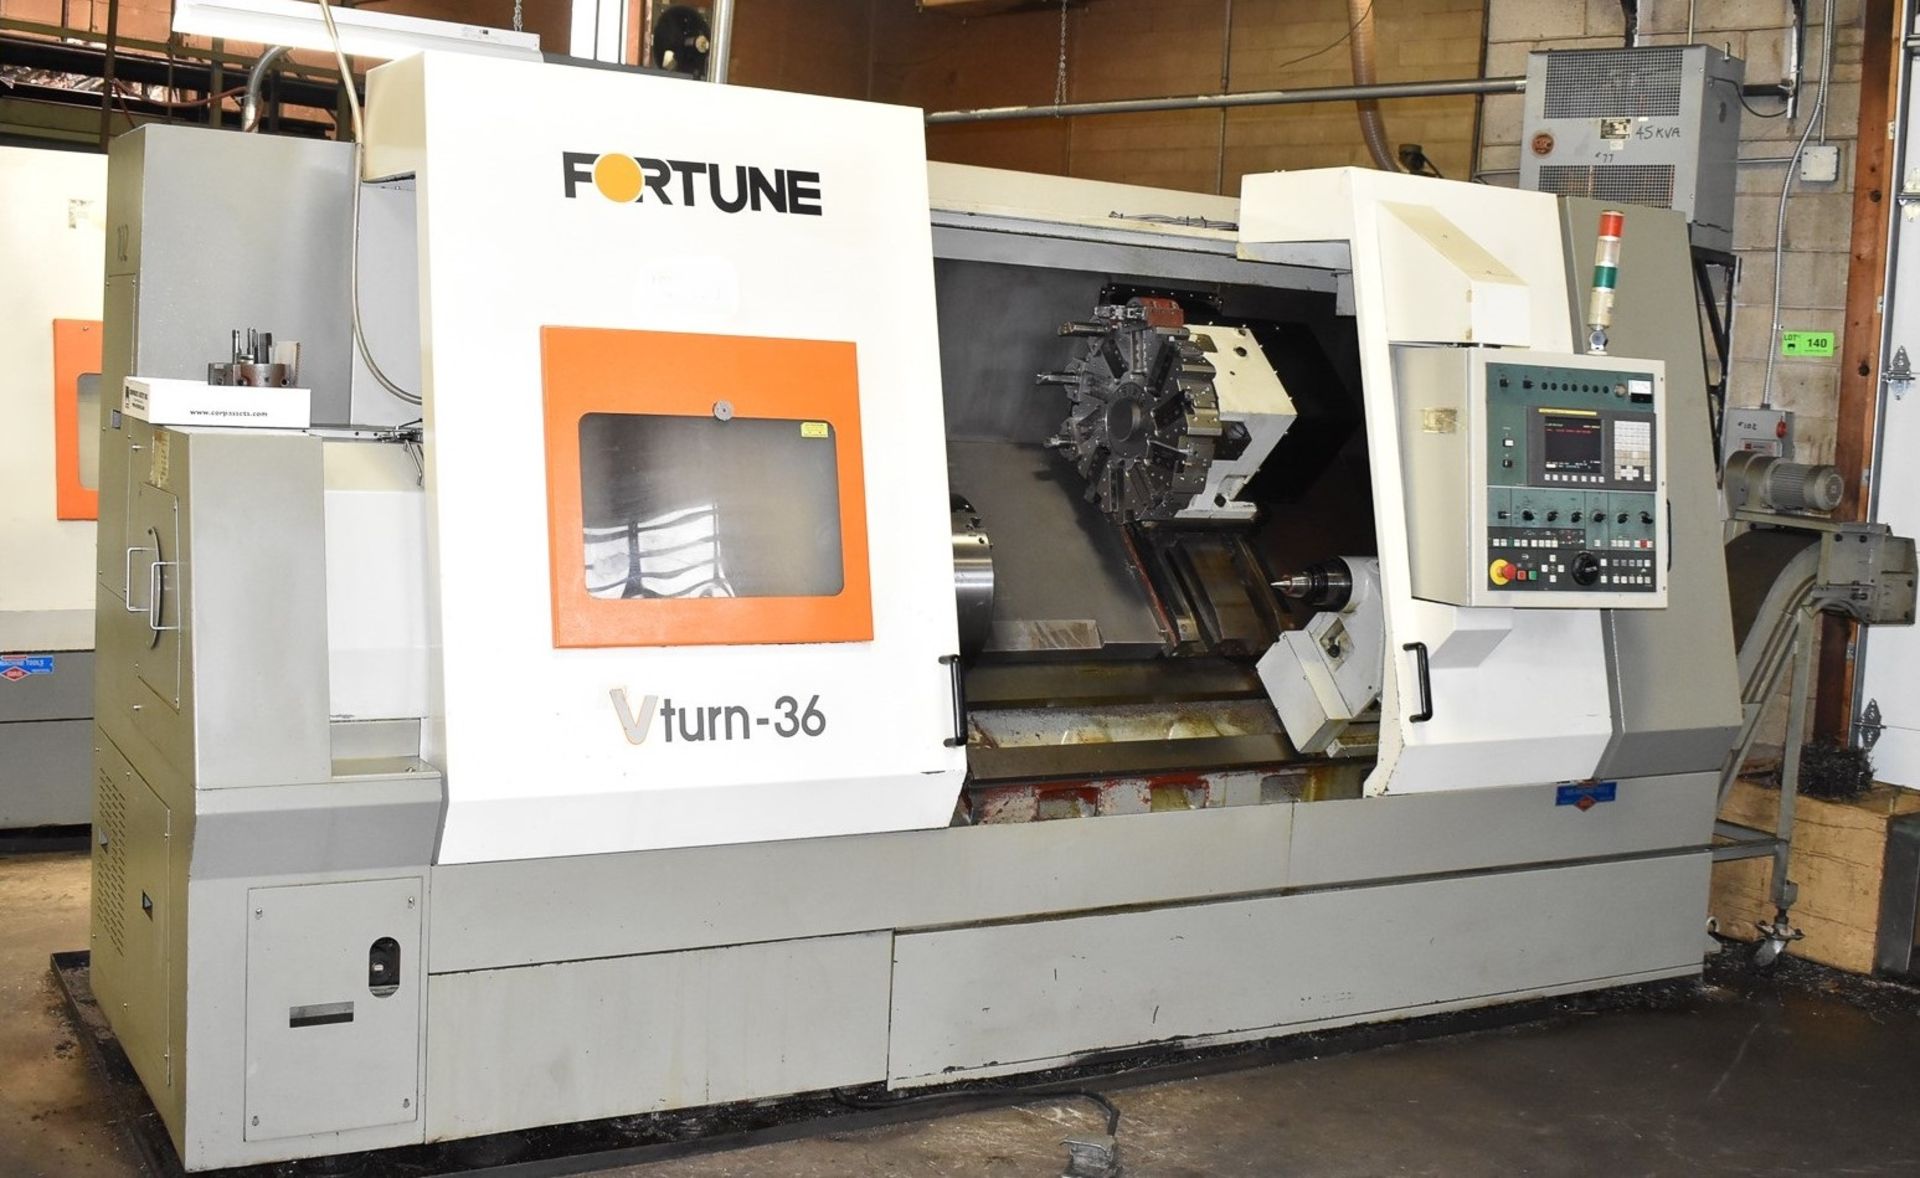 21.65" x 35" Victor (Fortune) Mdl Vturn-36 2-Axis CNC Lathe, S/N MD-1636, New 2007 - Image 2 of 10